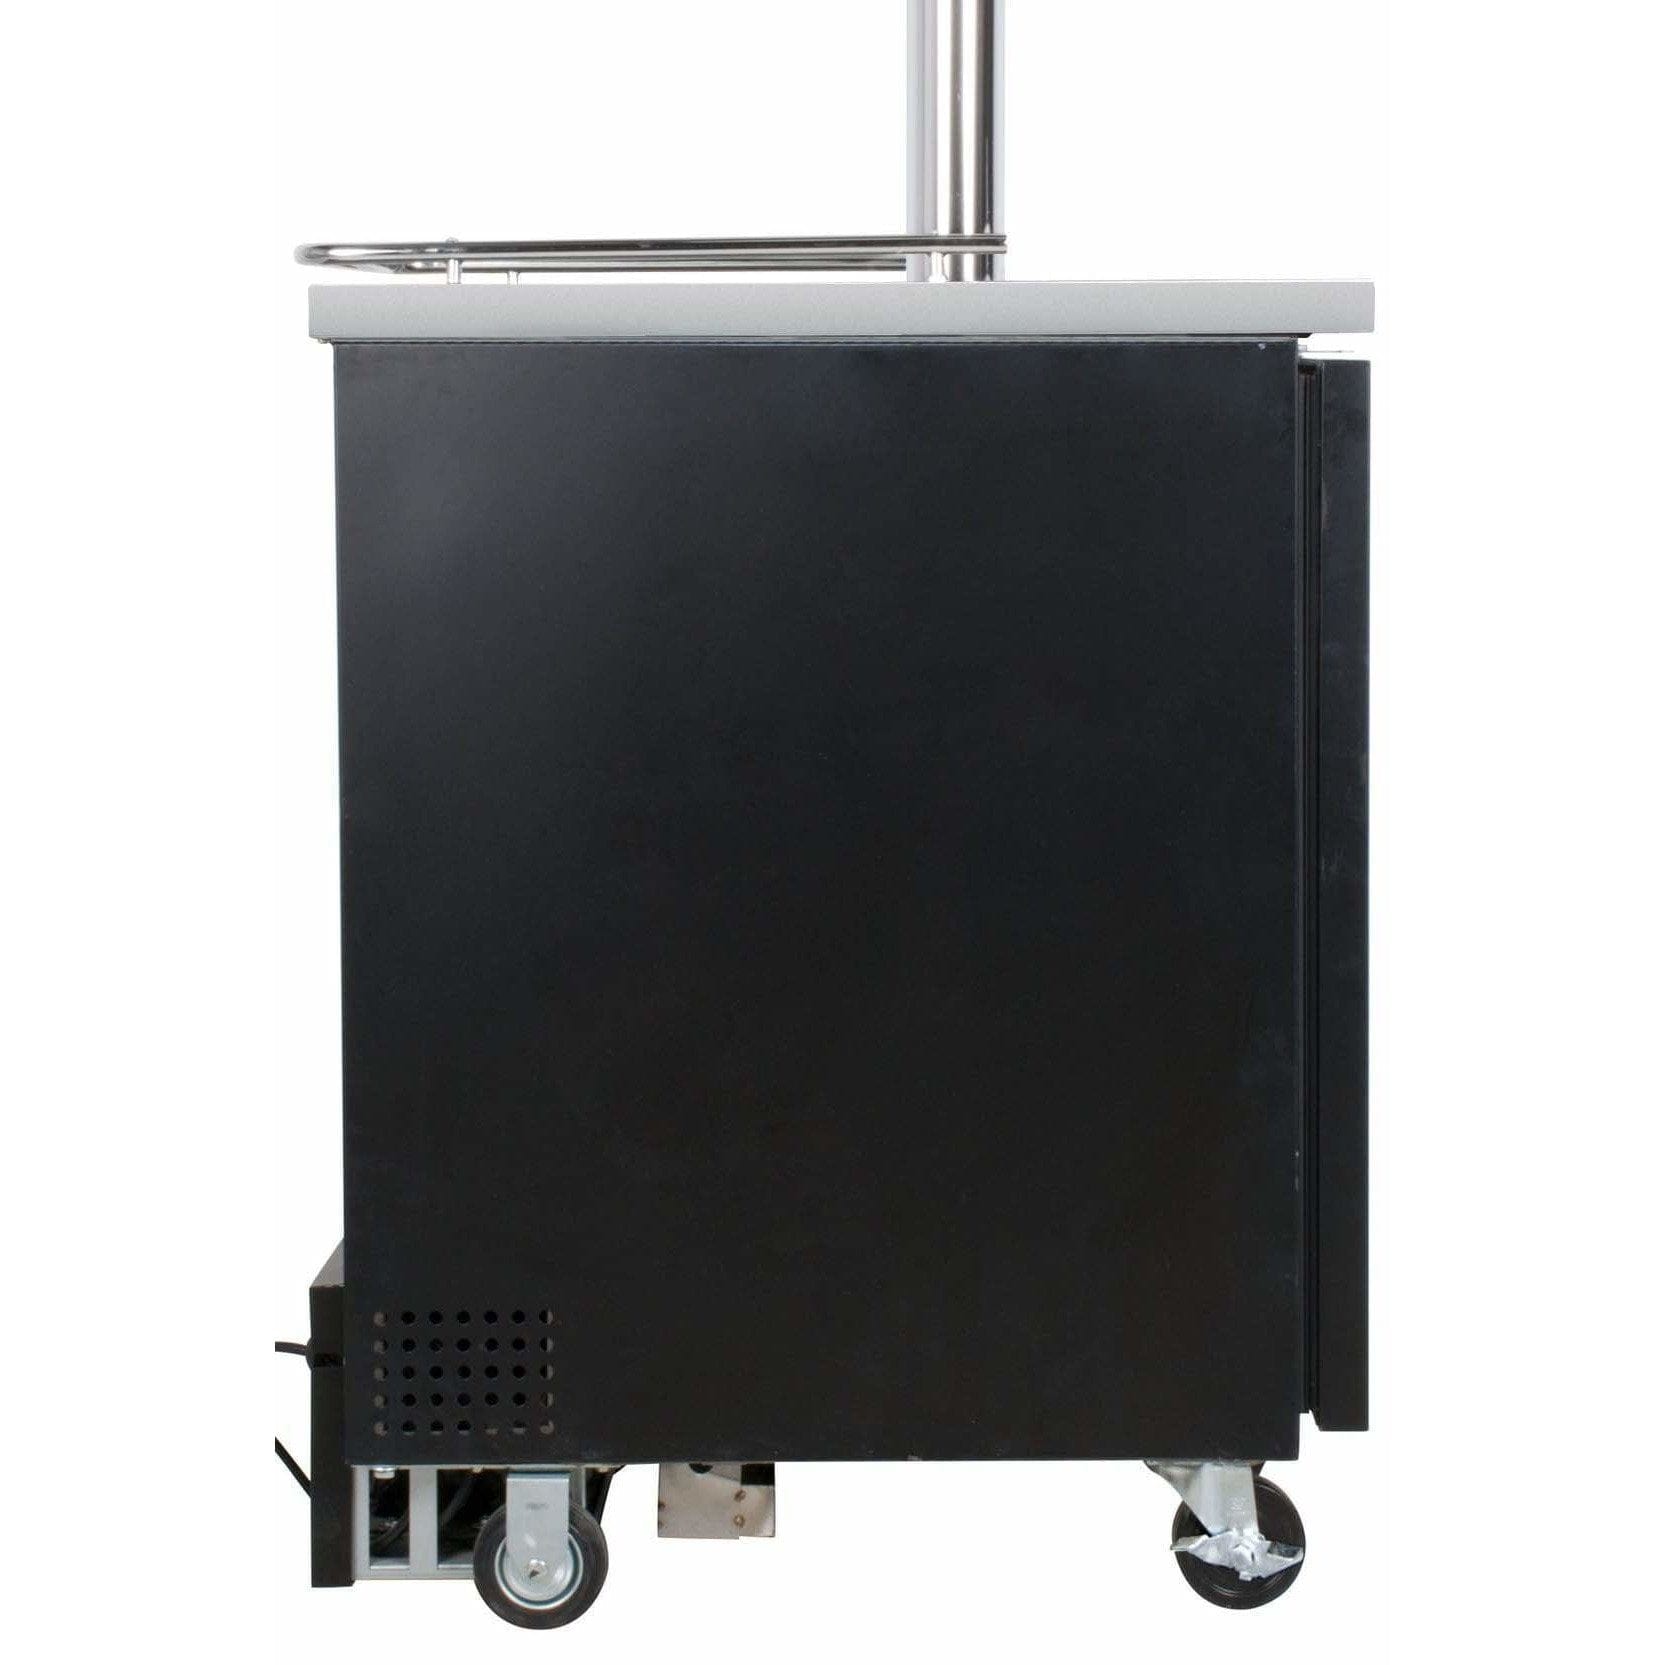 Kegco 24" Wide Dual Tap Black with Kegs Home Brew Kegerator HBK1XB-2K Wine Coolers Empire